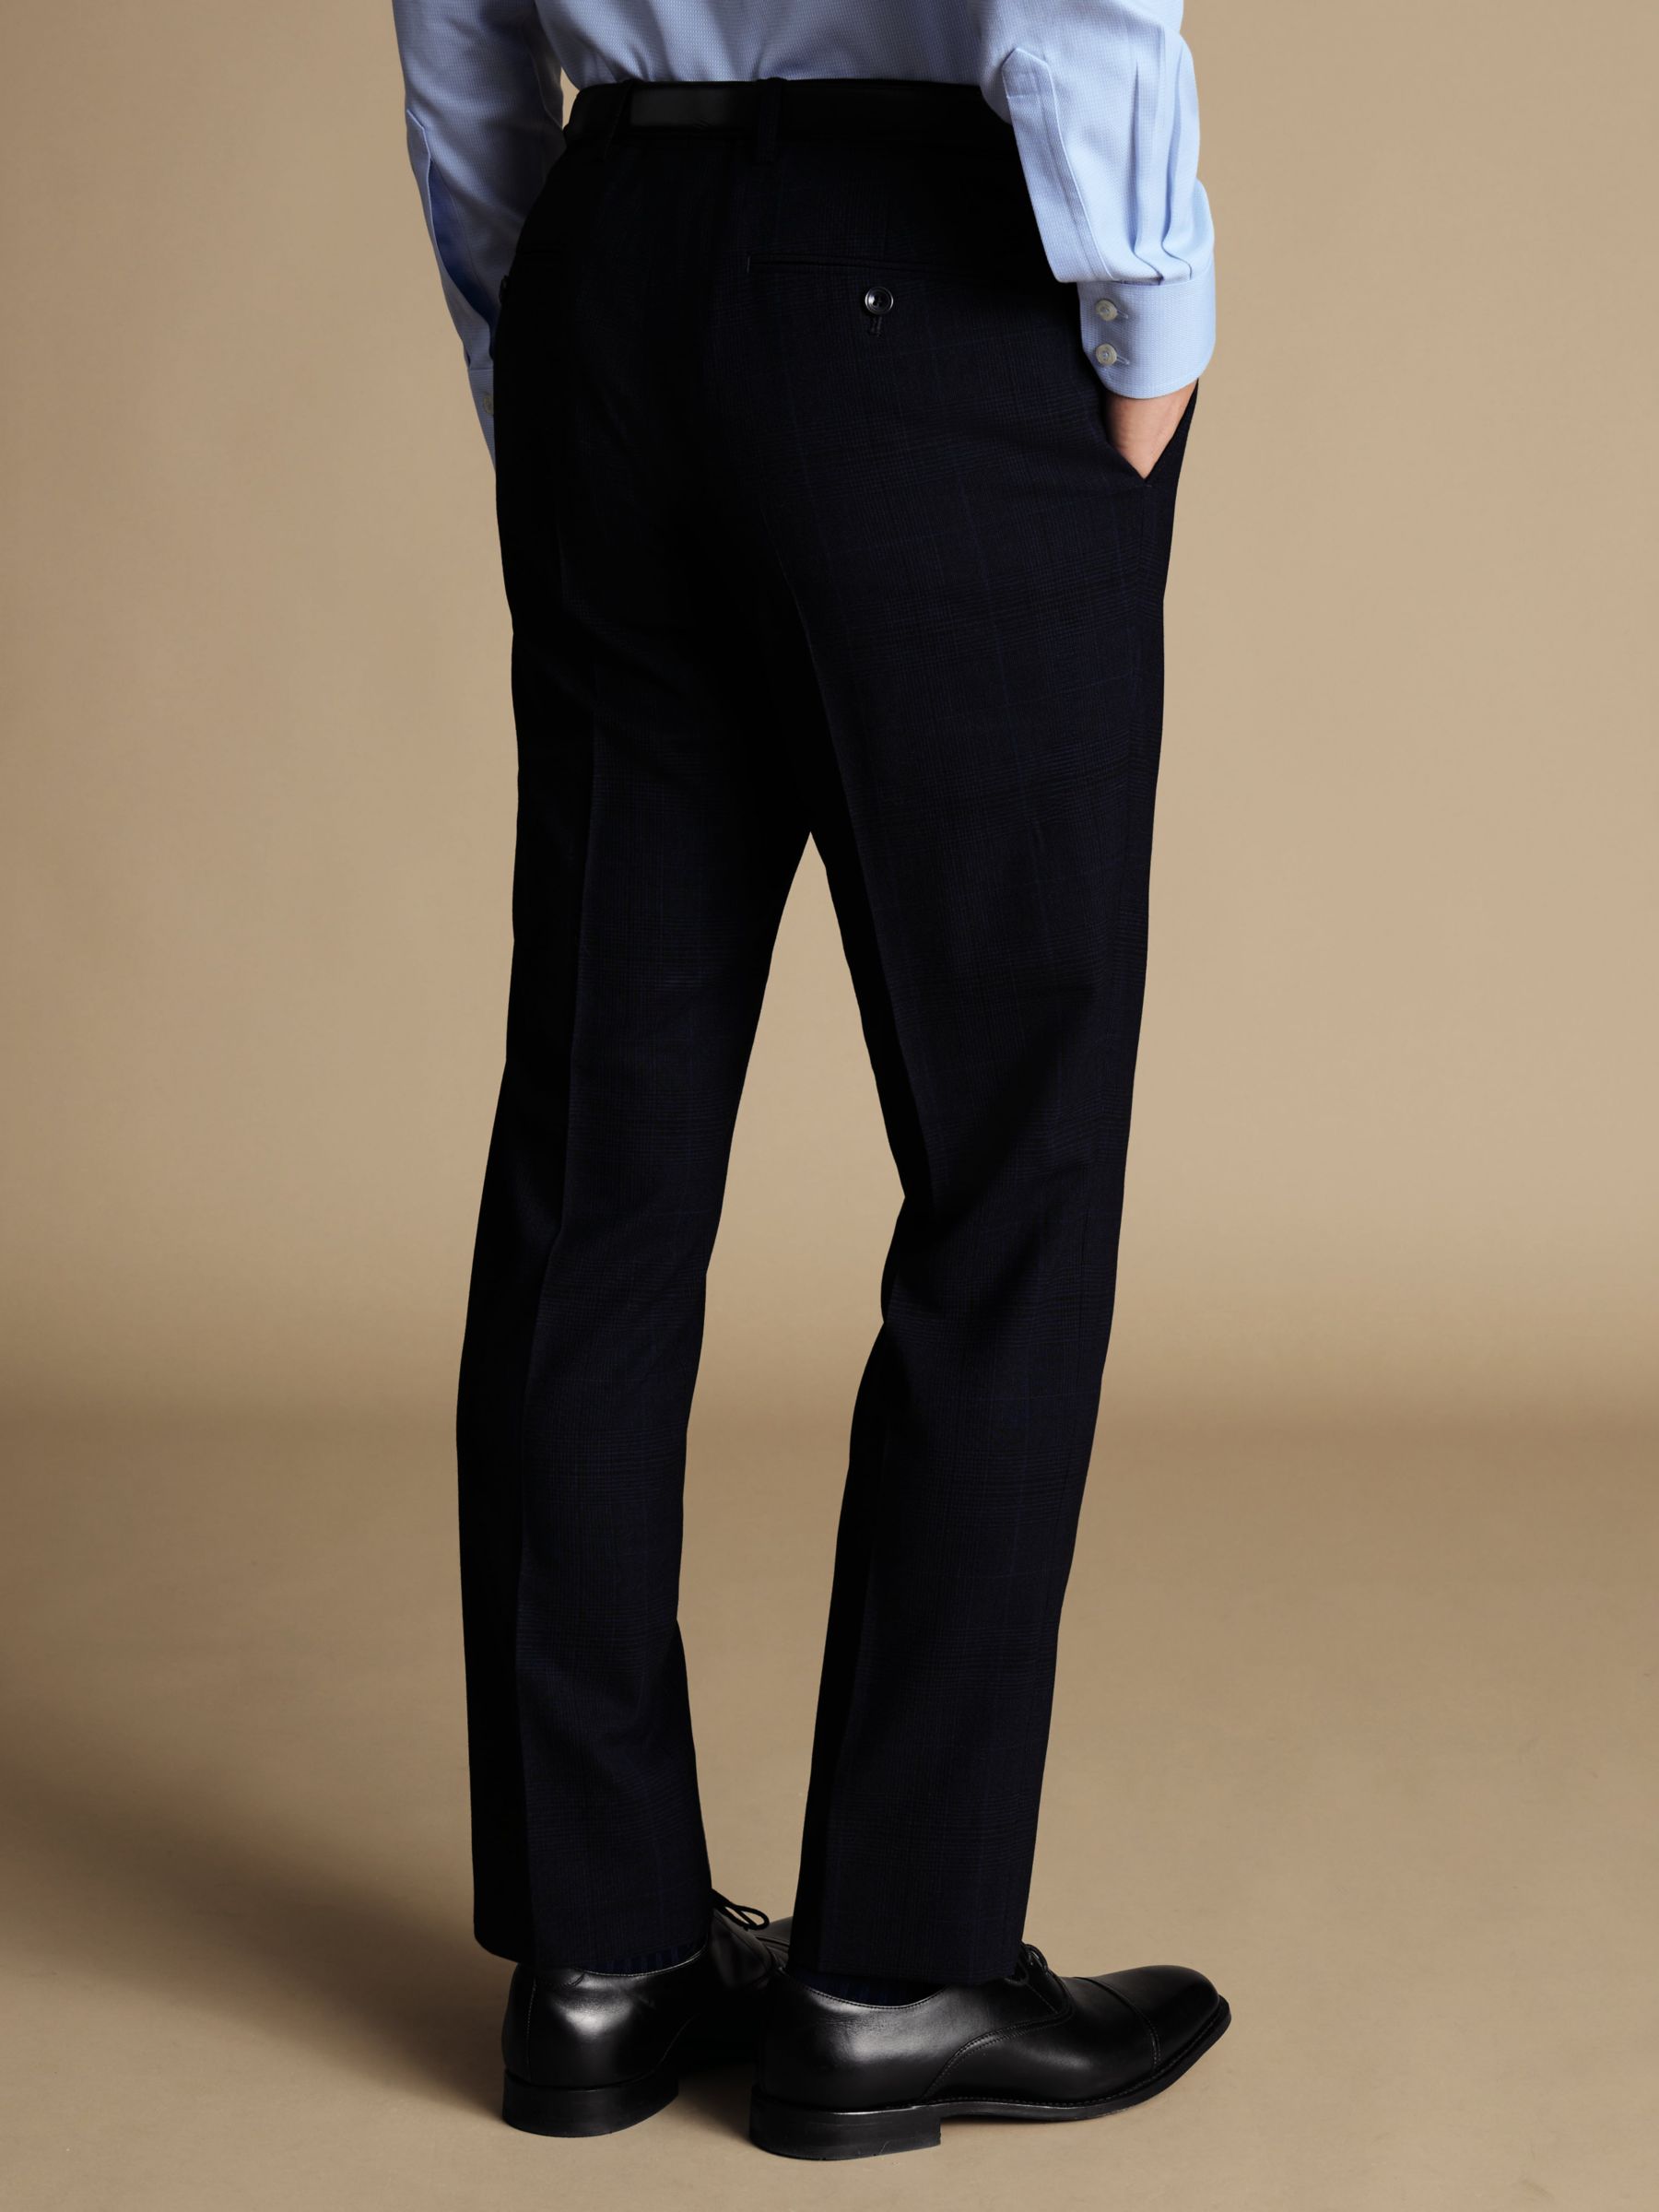 Buy Charles Tyrwhitt Prince of Wales Slim Fit Ultimate Performance Suit Trousers, Navy Online at johnlewis.com